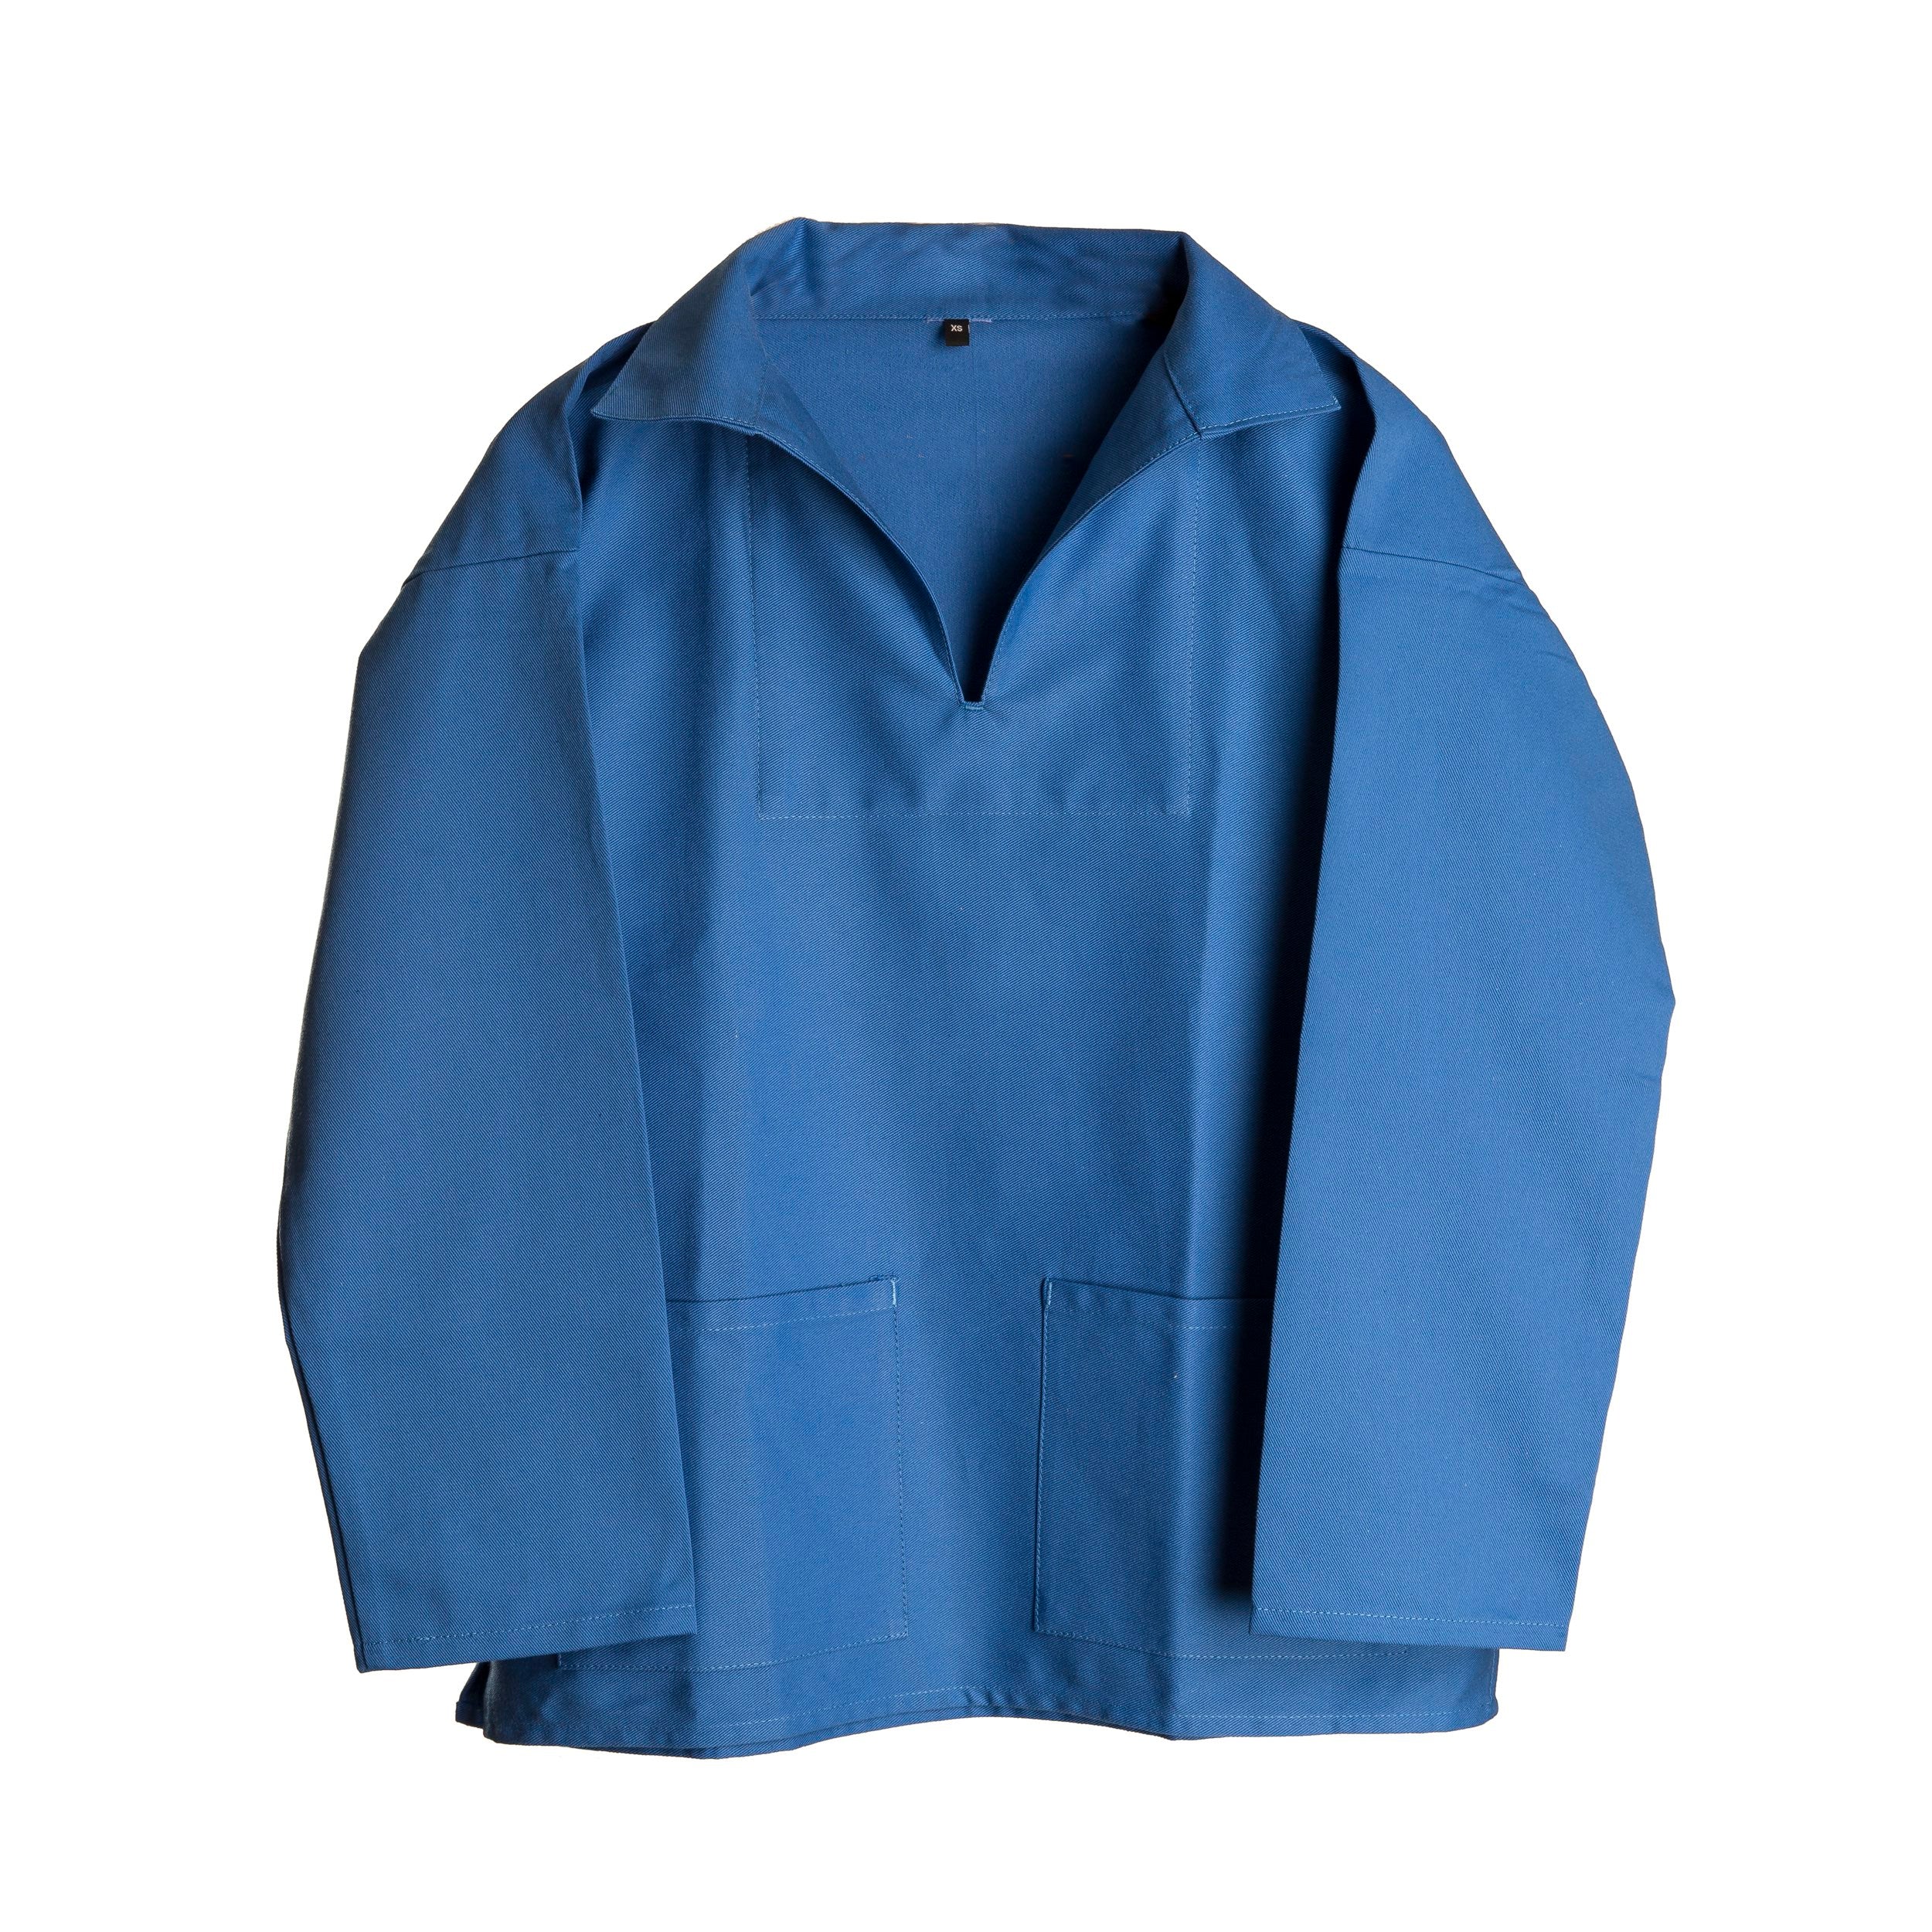 Carrier Company V-Neck smock in Sky Cotton Drill